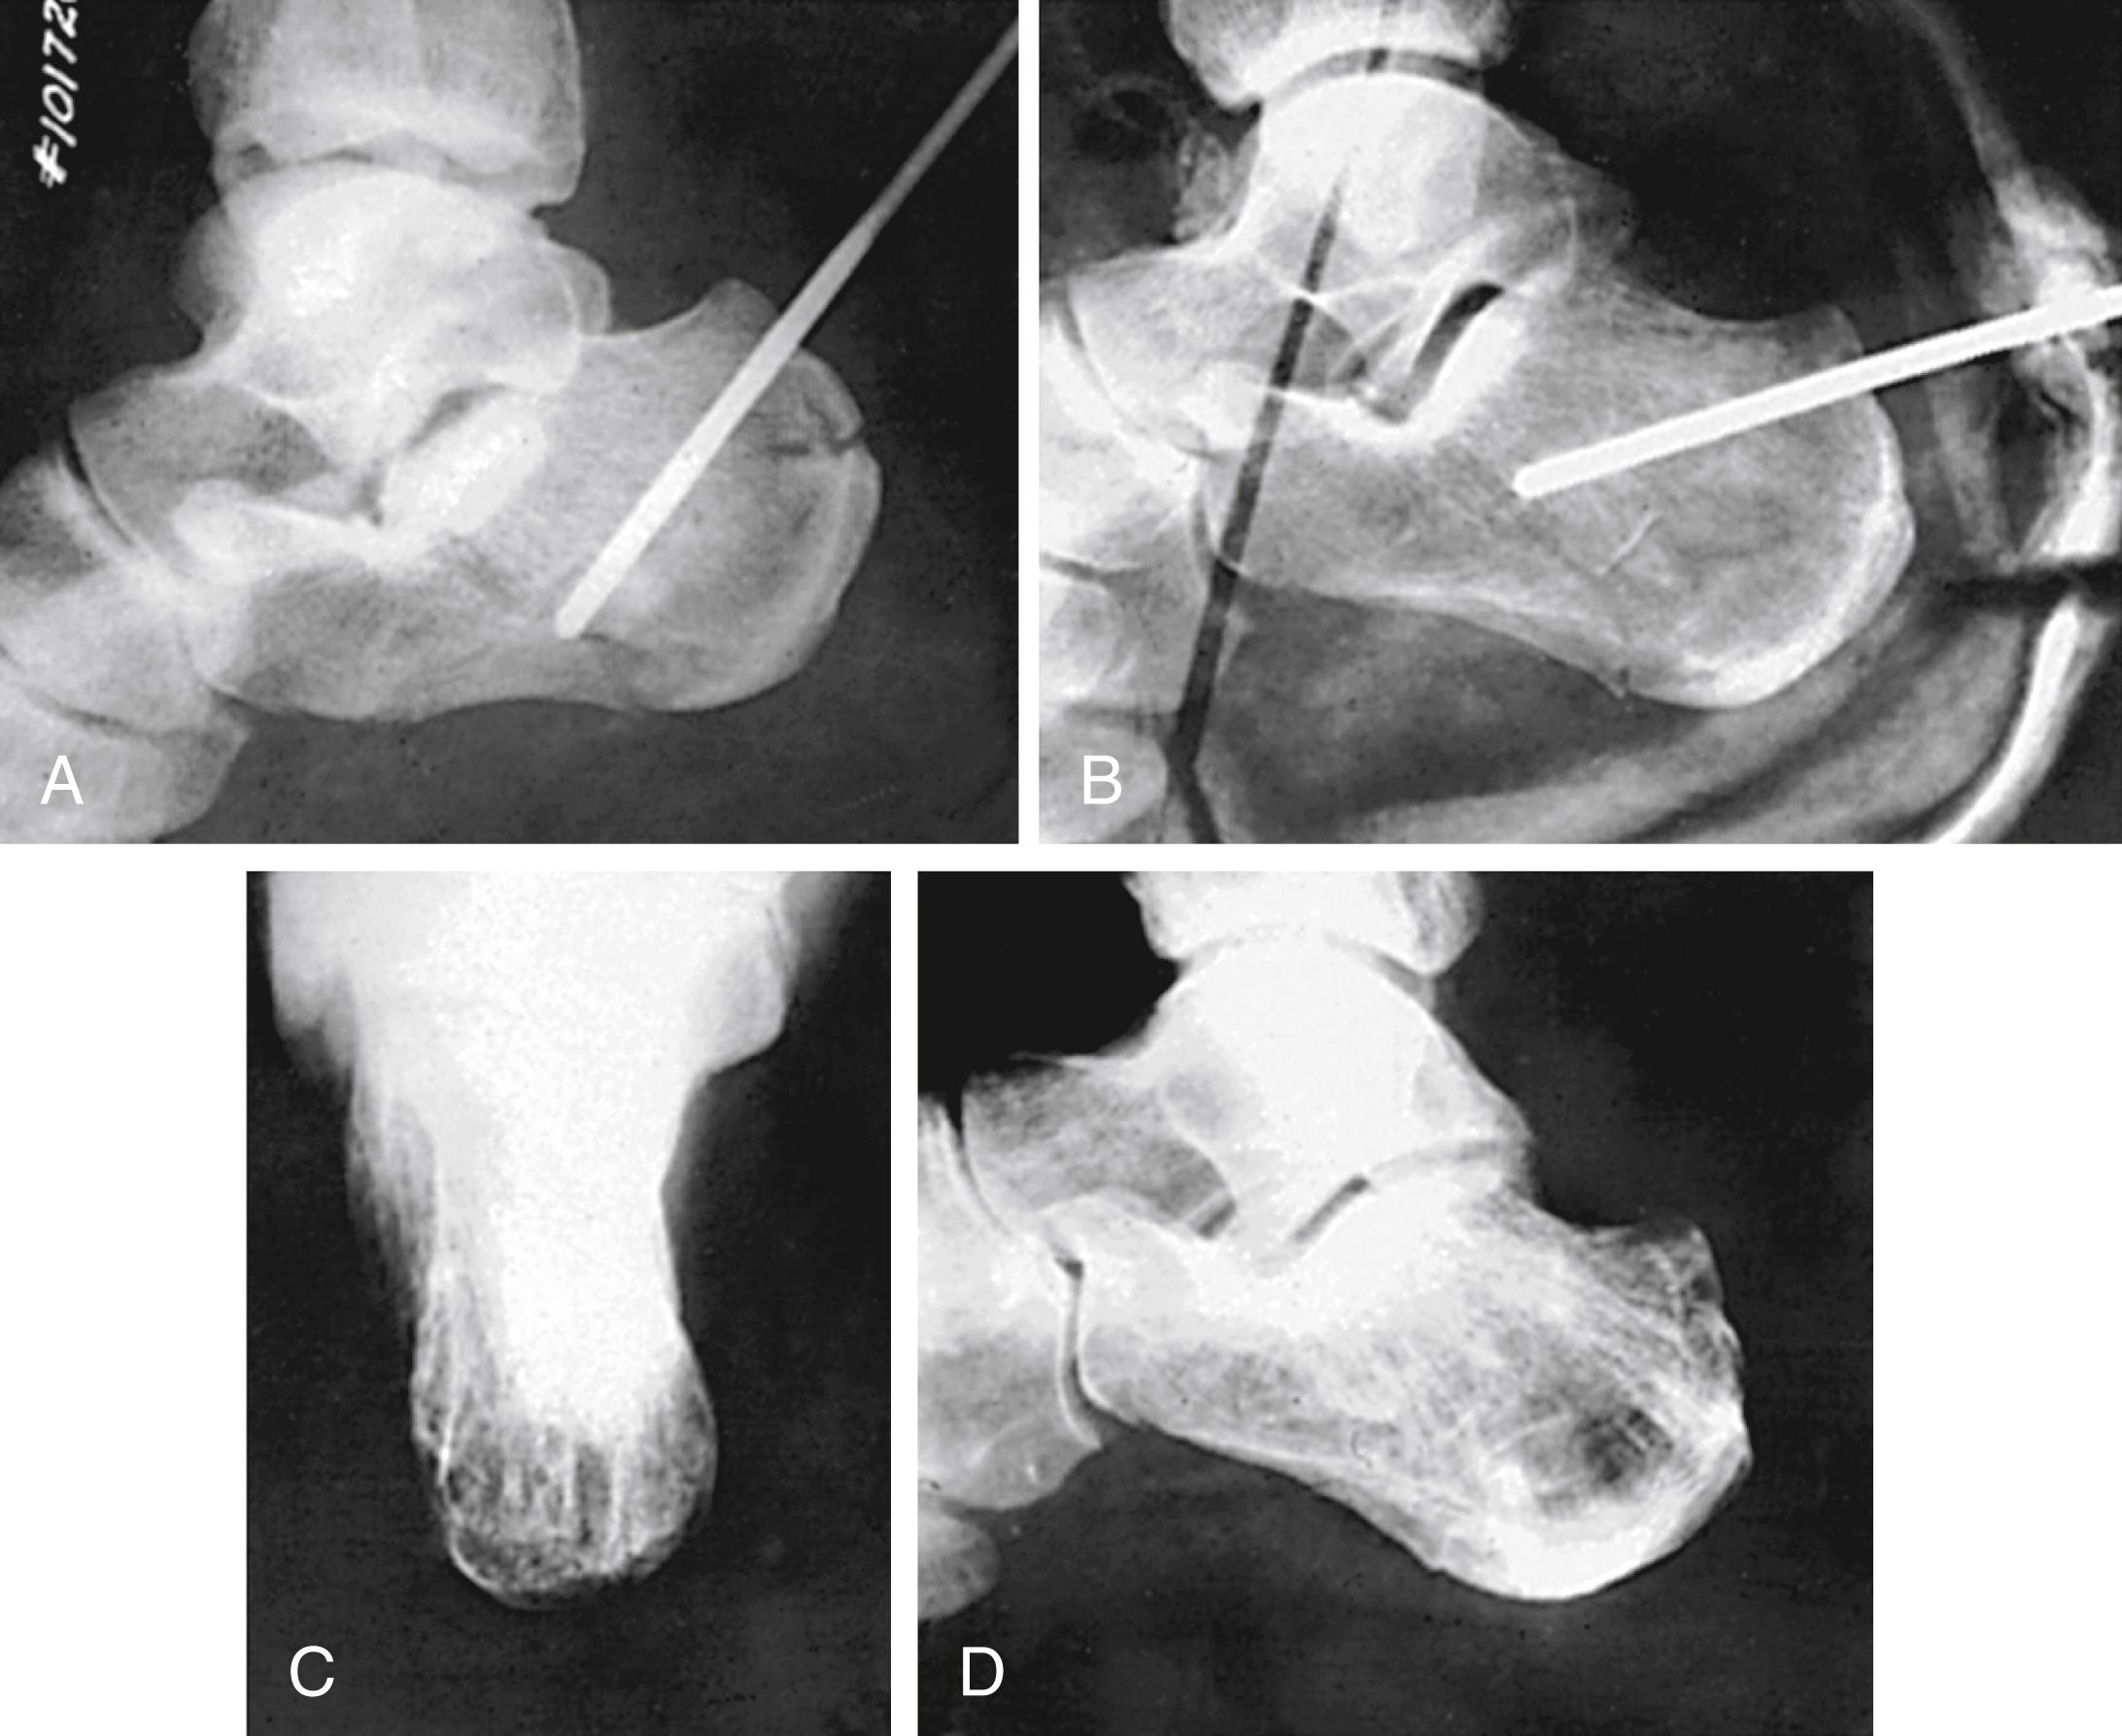 FIGURE 89.16, Essex-Lopresti reduction of fracture of calcaneus by manipulation and pin fixation. A, Correct position of pin. B, Postoperative radiograph through cast. C and D, Result after 1 year. Patient returned to work as deckhand on barge. SEE TECHNIQUE 89.4.